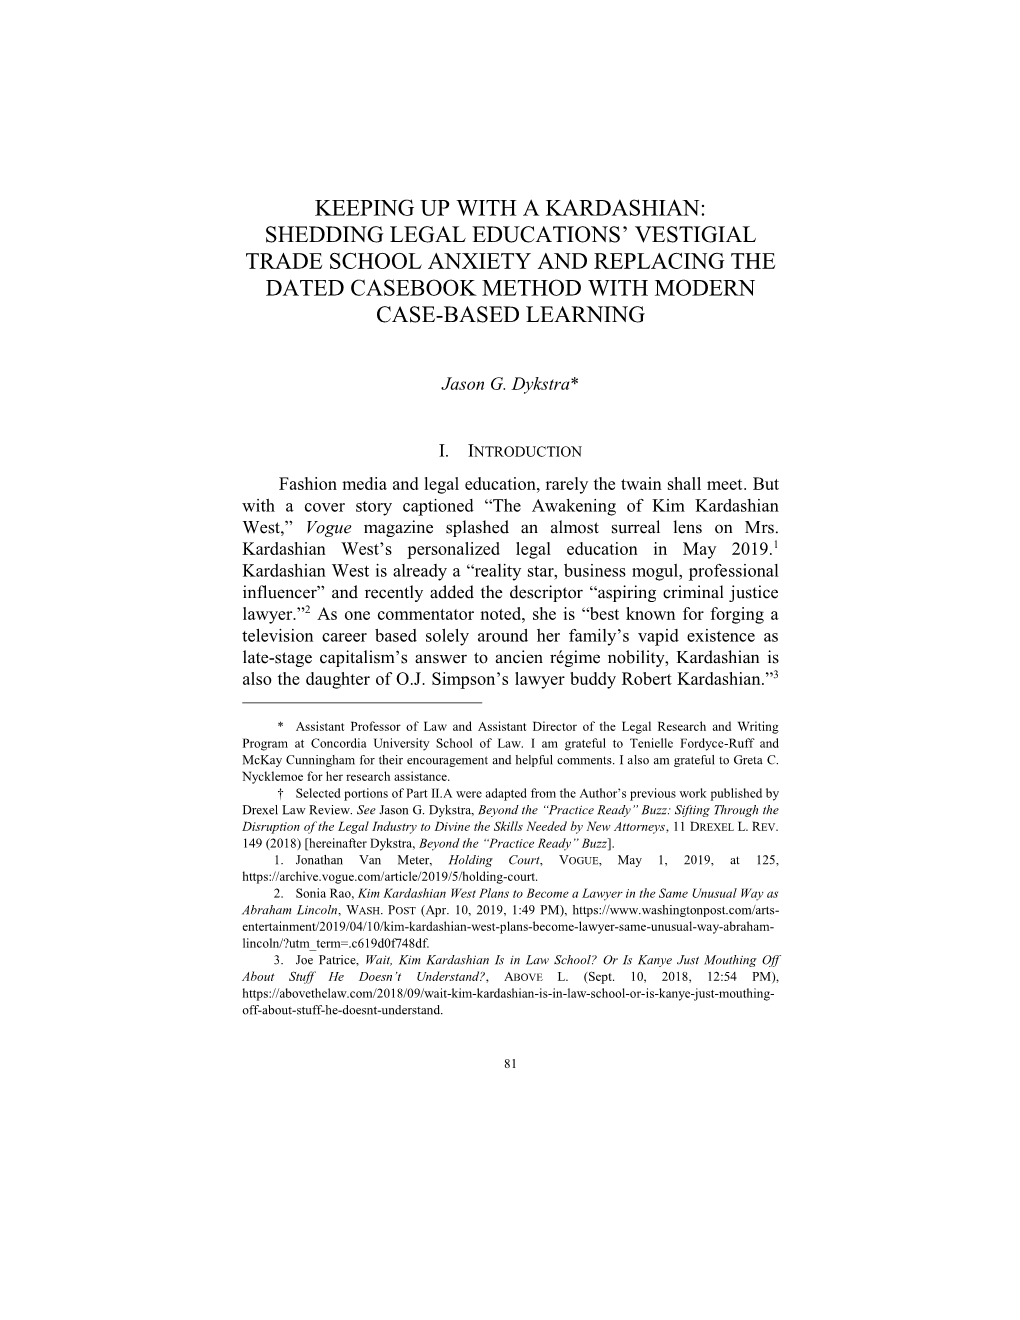 Keeping up with a Kardashian: Shedding Legal Educations’ Vestigial Trade School Anxiety and Replacing the Dated Casebook Method with Modern Case-Based Learning